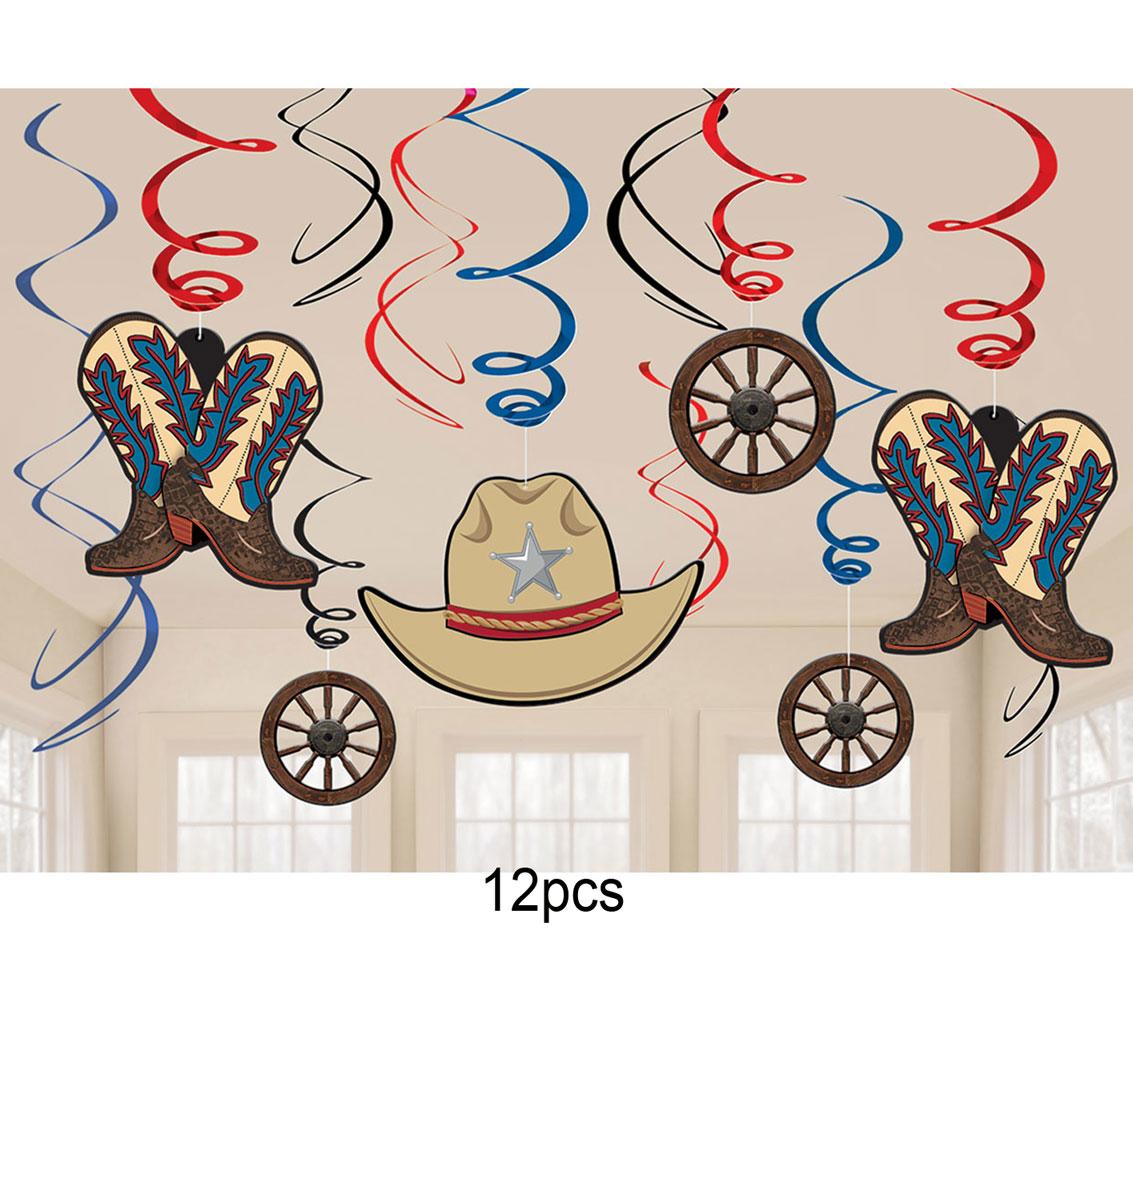 12pk Western Swirl Decorations by Amscan 670726 available from a large collection of Wild West party goods here at Karnival Costumes online party shop